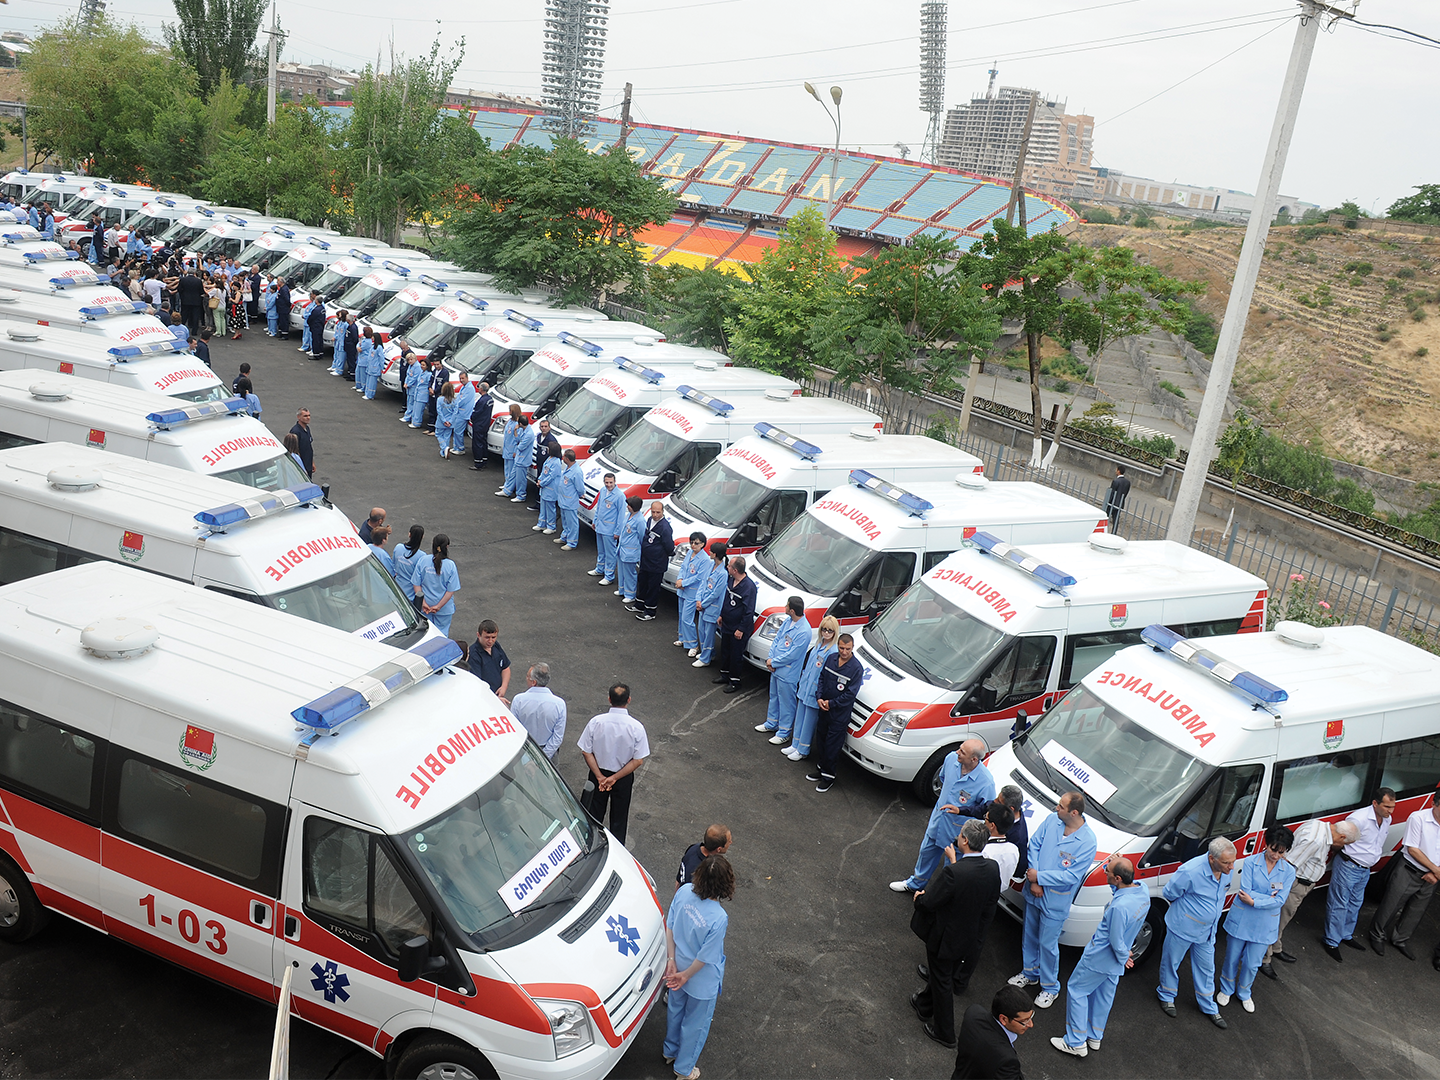 Donated ambulances in a parking